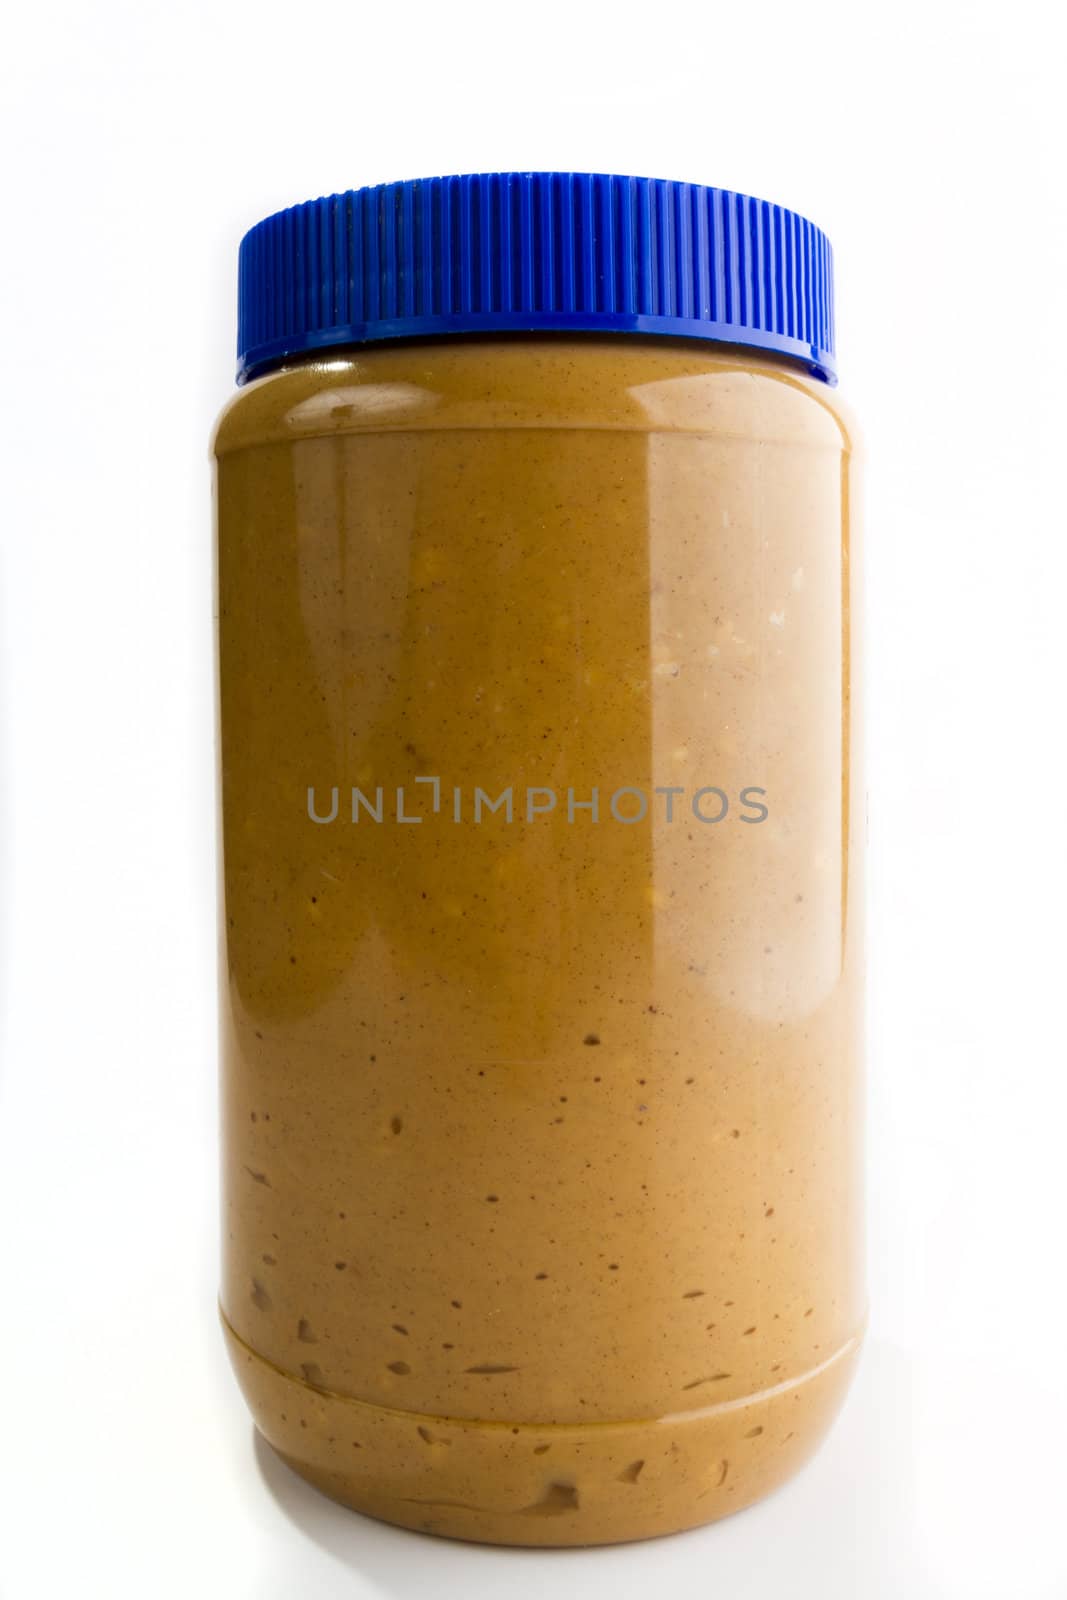 Single tall jar of peanut butter with a highlight reflection on the right side. image is against a light background